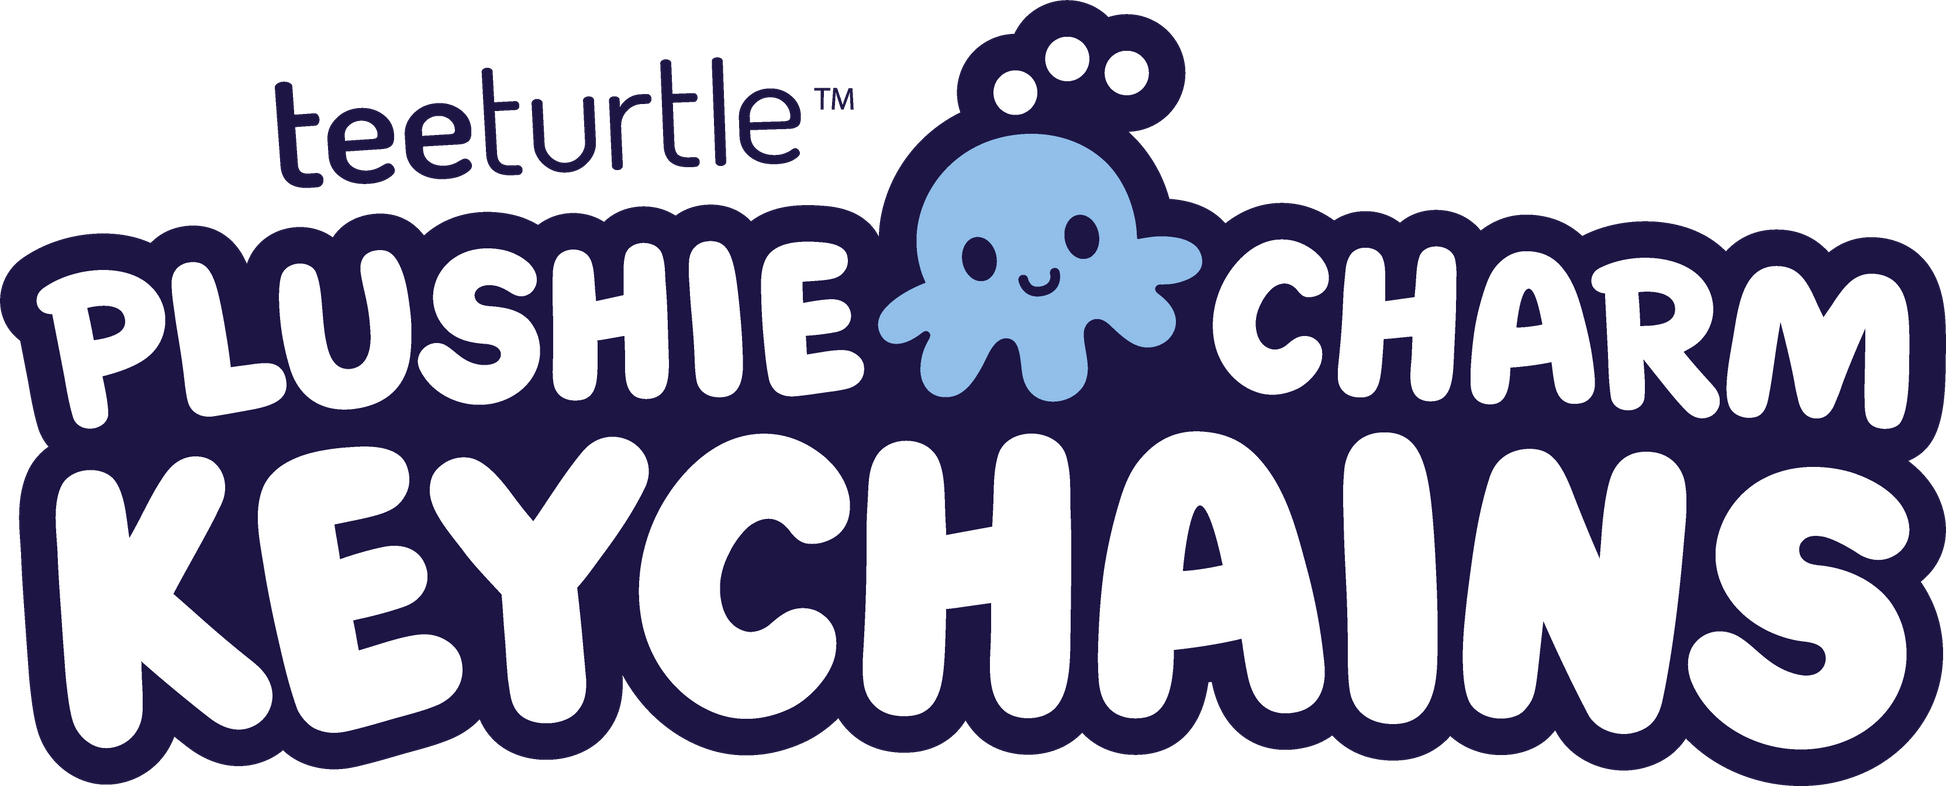 The logo for TeeTurtle's TeeTurtle Cat Plushie Charm Keychain (Light Gray) featuring adorable cat characters.